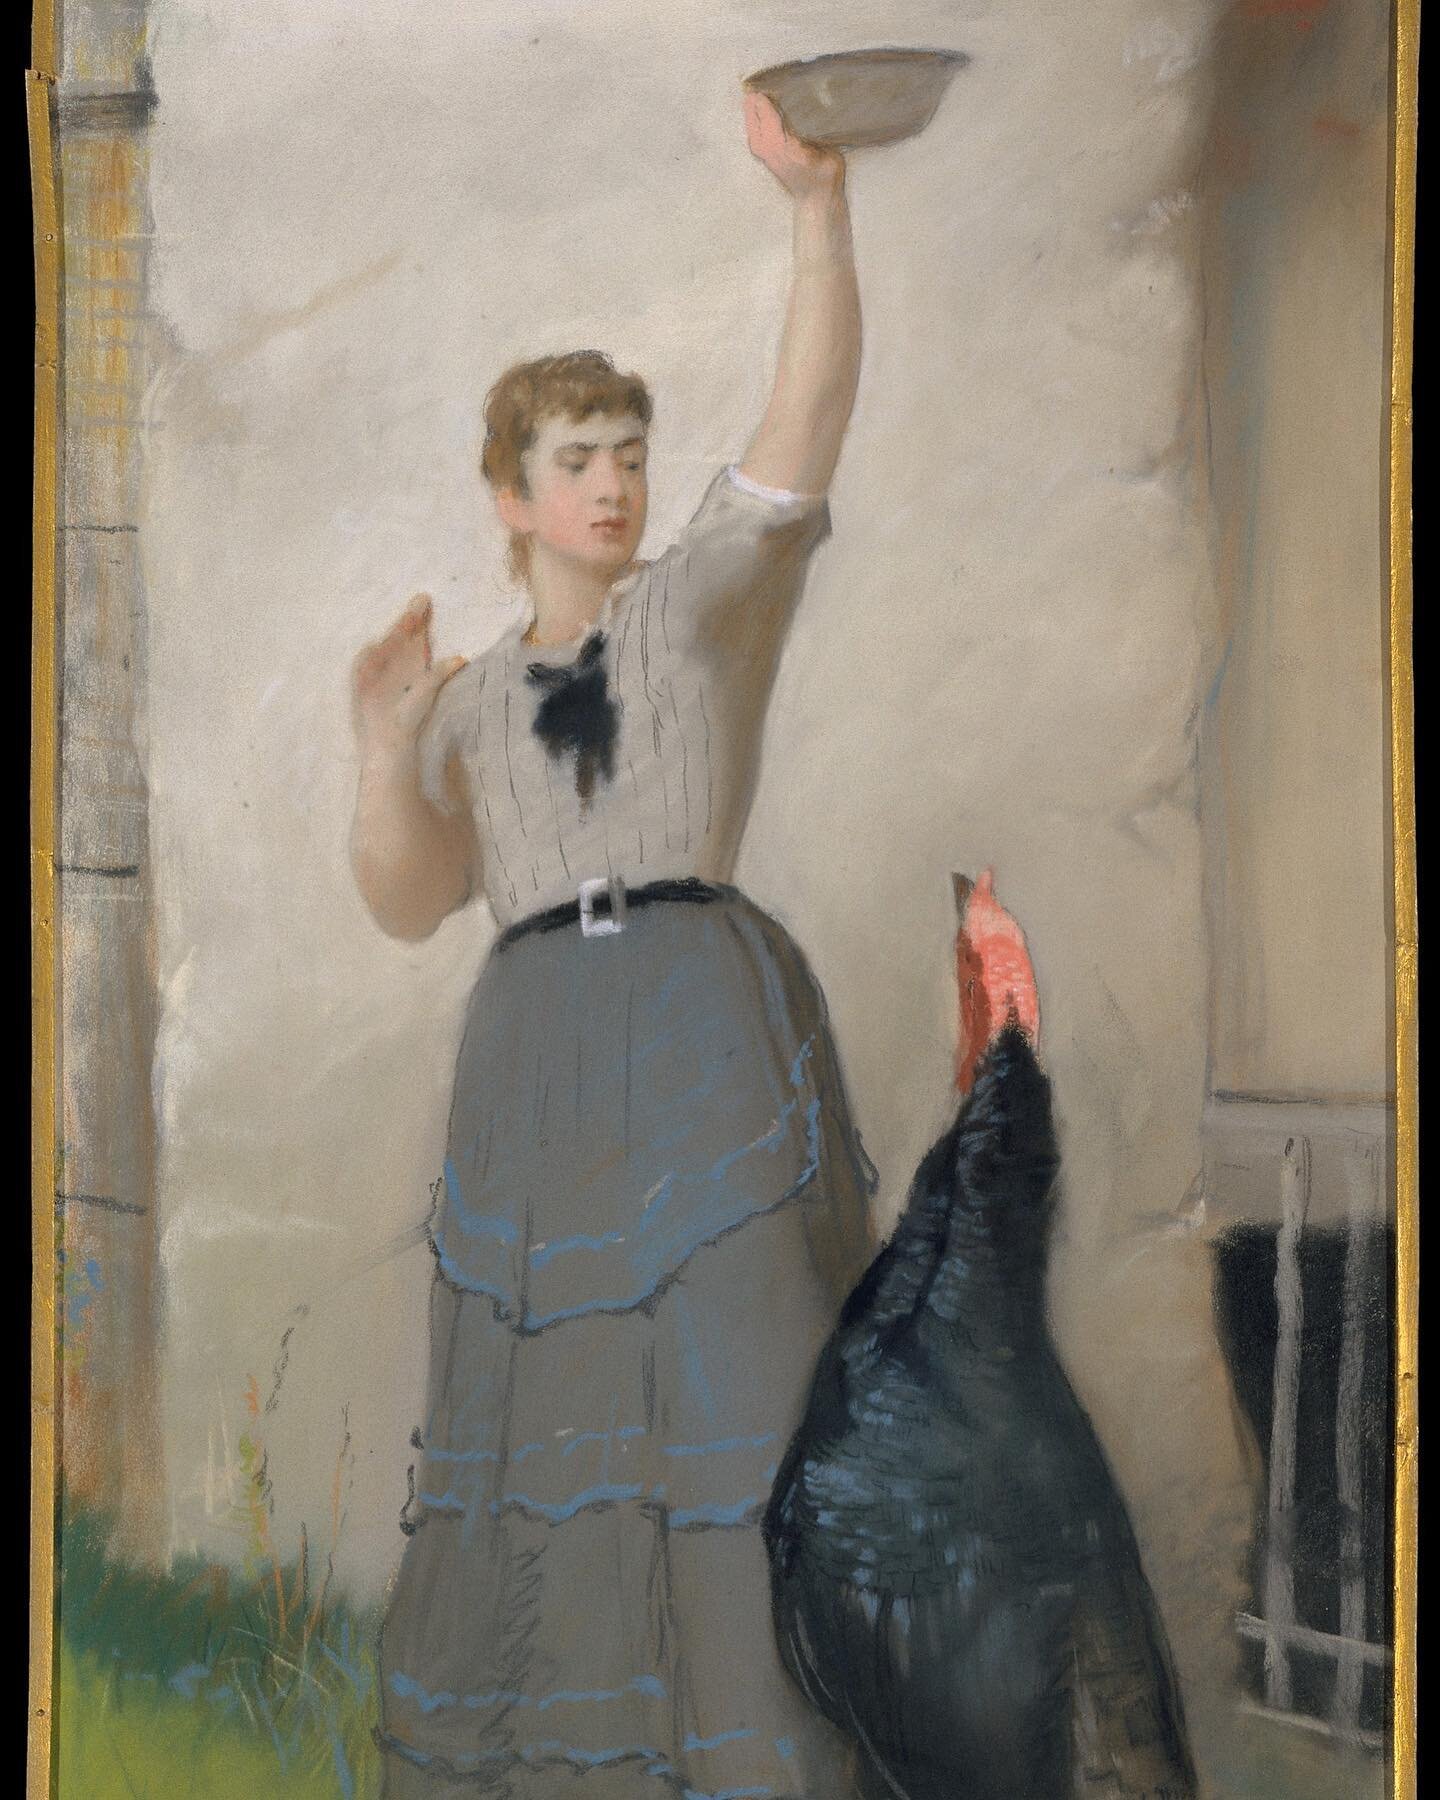 A different kind of turkey dinner.⁠
⁠
***⁠
⁠
&quot;Feeding the Turkey&quot; (circa 1872-1880), Eastman Johnson (American, 1824-1906), Pastel on wove paper, mounted to canvas on a wooden stretcher. Source: Metropolitan Museum of Art, New York.⁠
⁠
***⁠